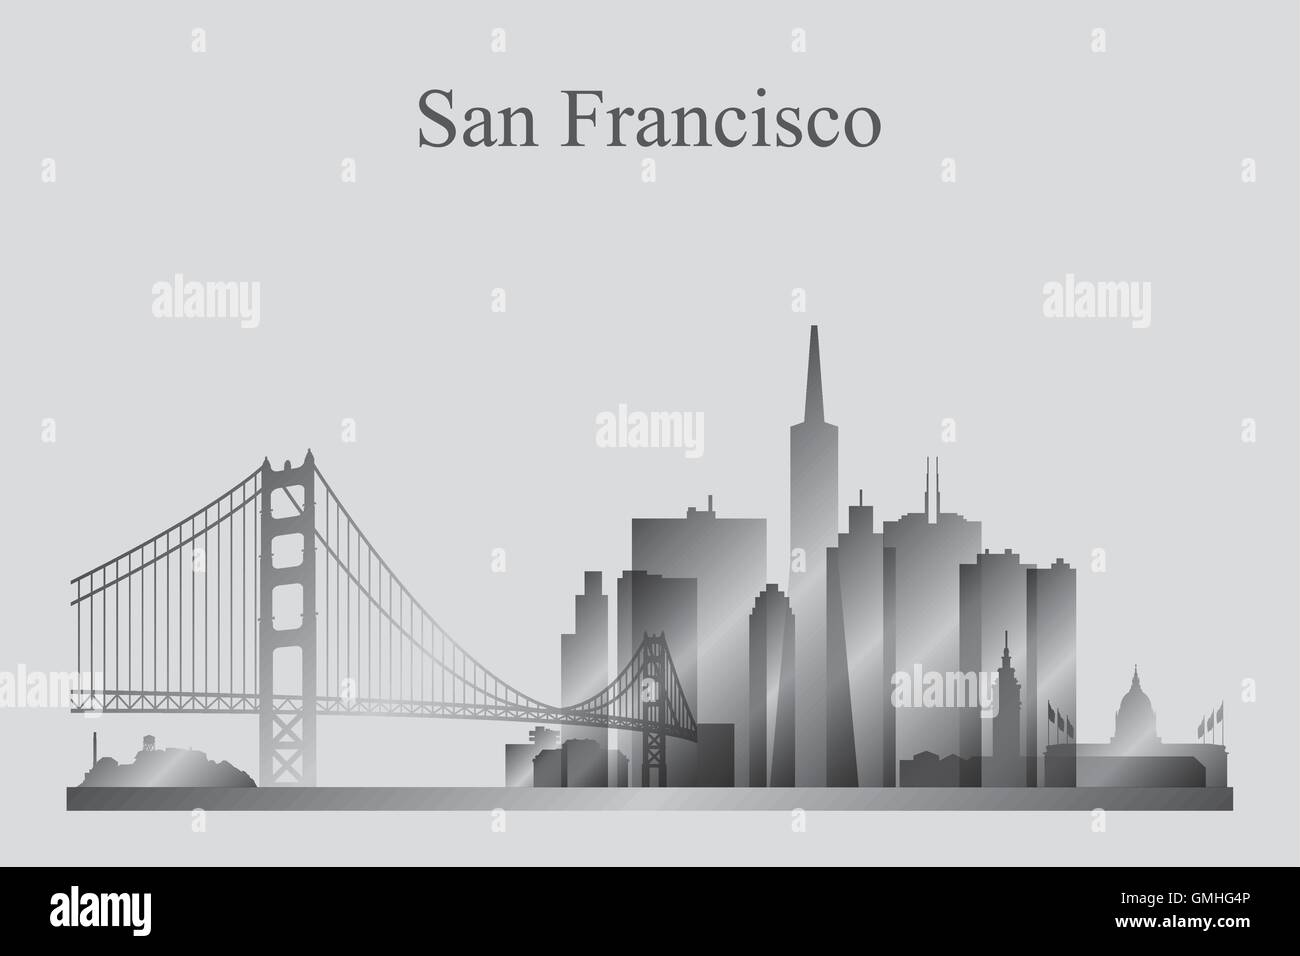 San Francisco city skyline silhouette in grayscale Stock Vector